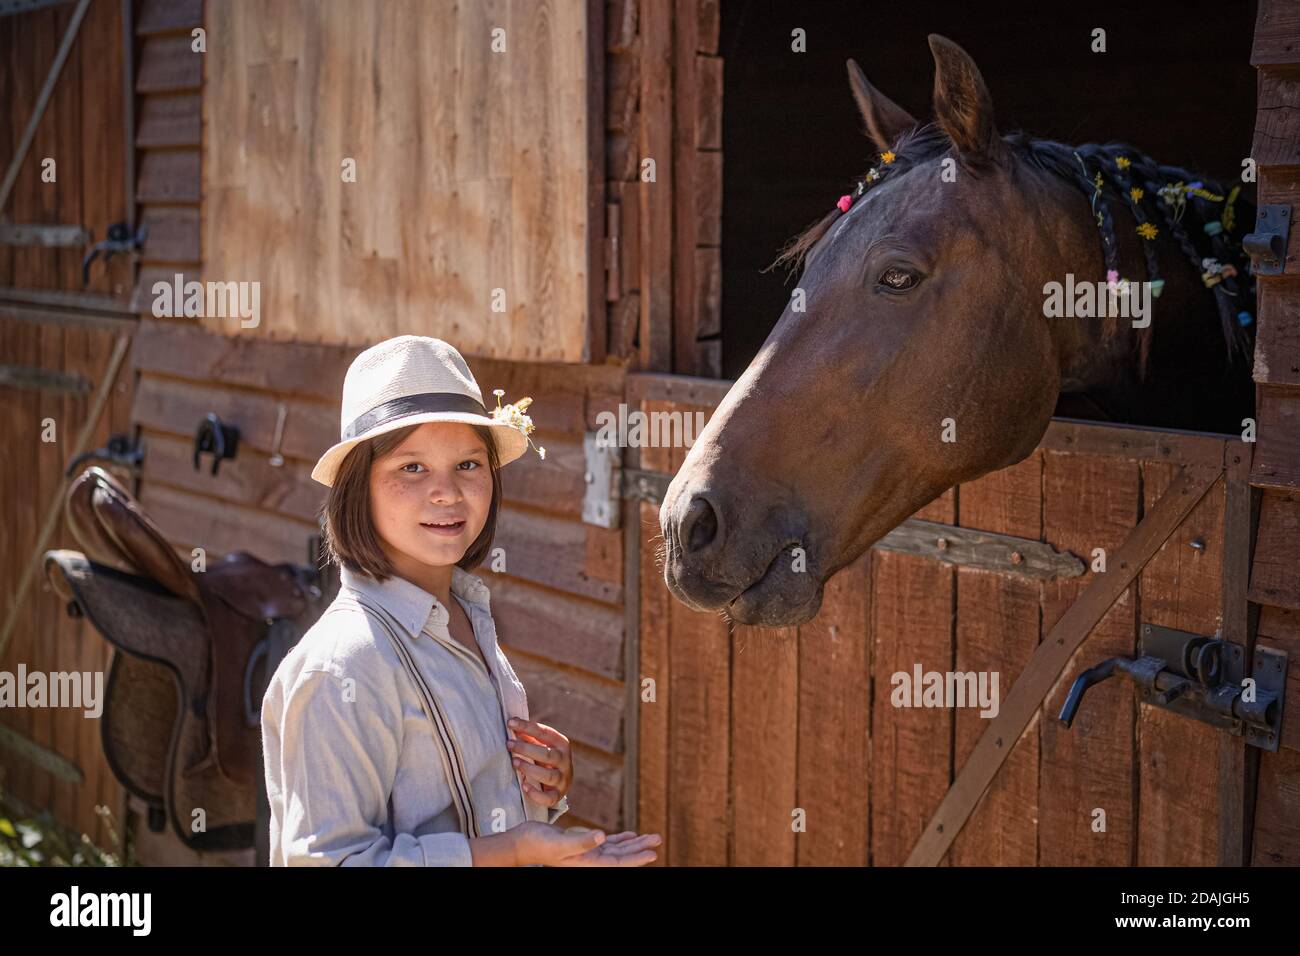 Little girl rider communicates with horse after equestrian sport. Brown mare peeks out of stable in friendly manner. Animal themes Stock Photo